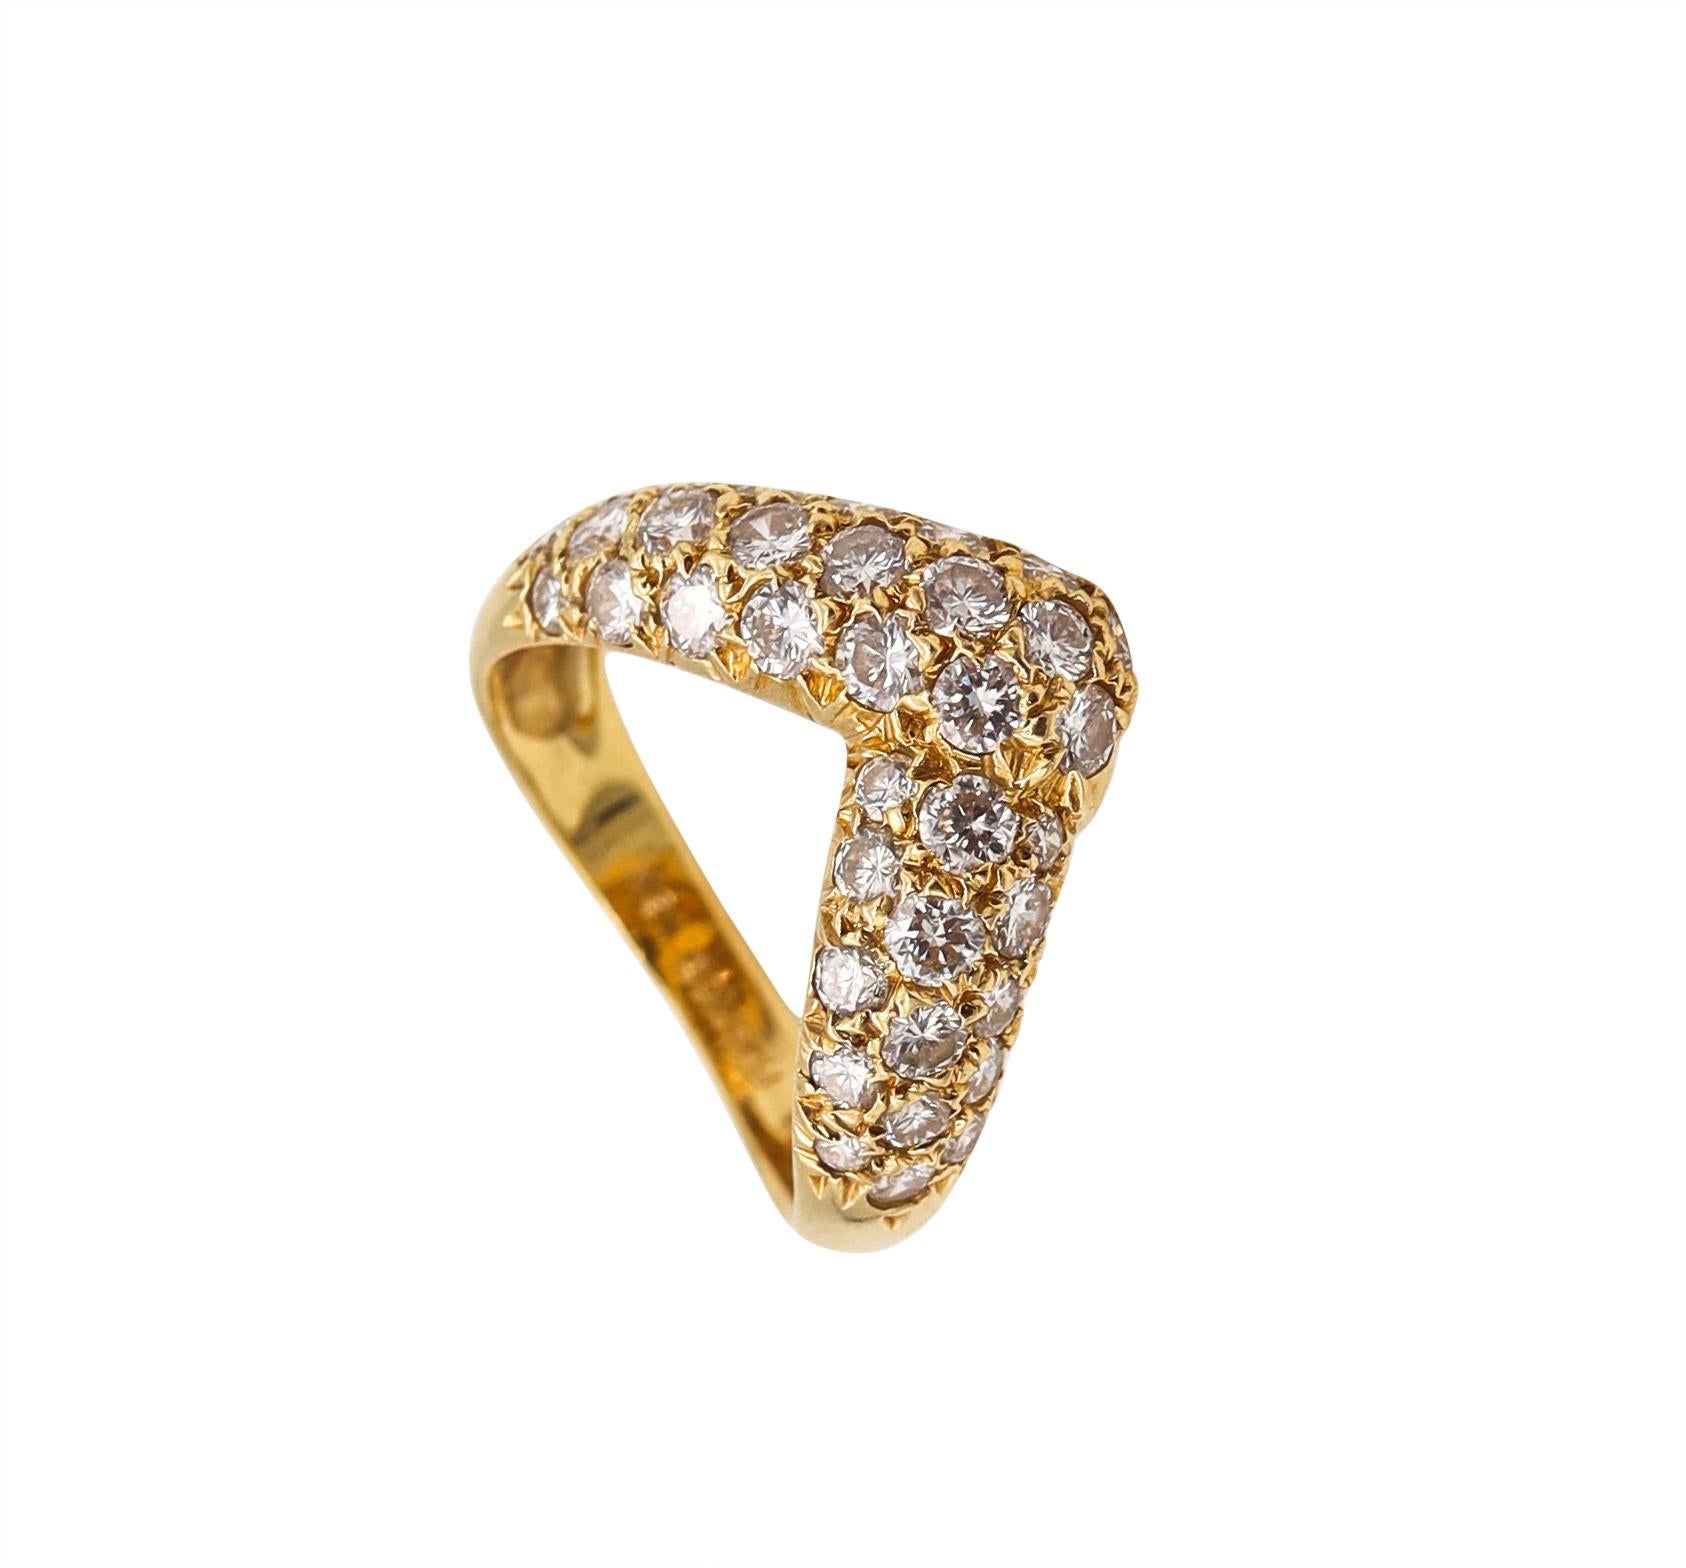 V shaped Ring designed by Van Cleef & Arpels.

An elegant everyday piece, created in Paris France by the house of Van Cleef & Arpels back in the 1970's. This sleek V shaped ring has been crafted in solid yellow gold of 18 karats, with high polished